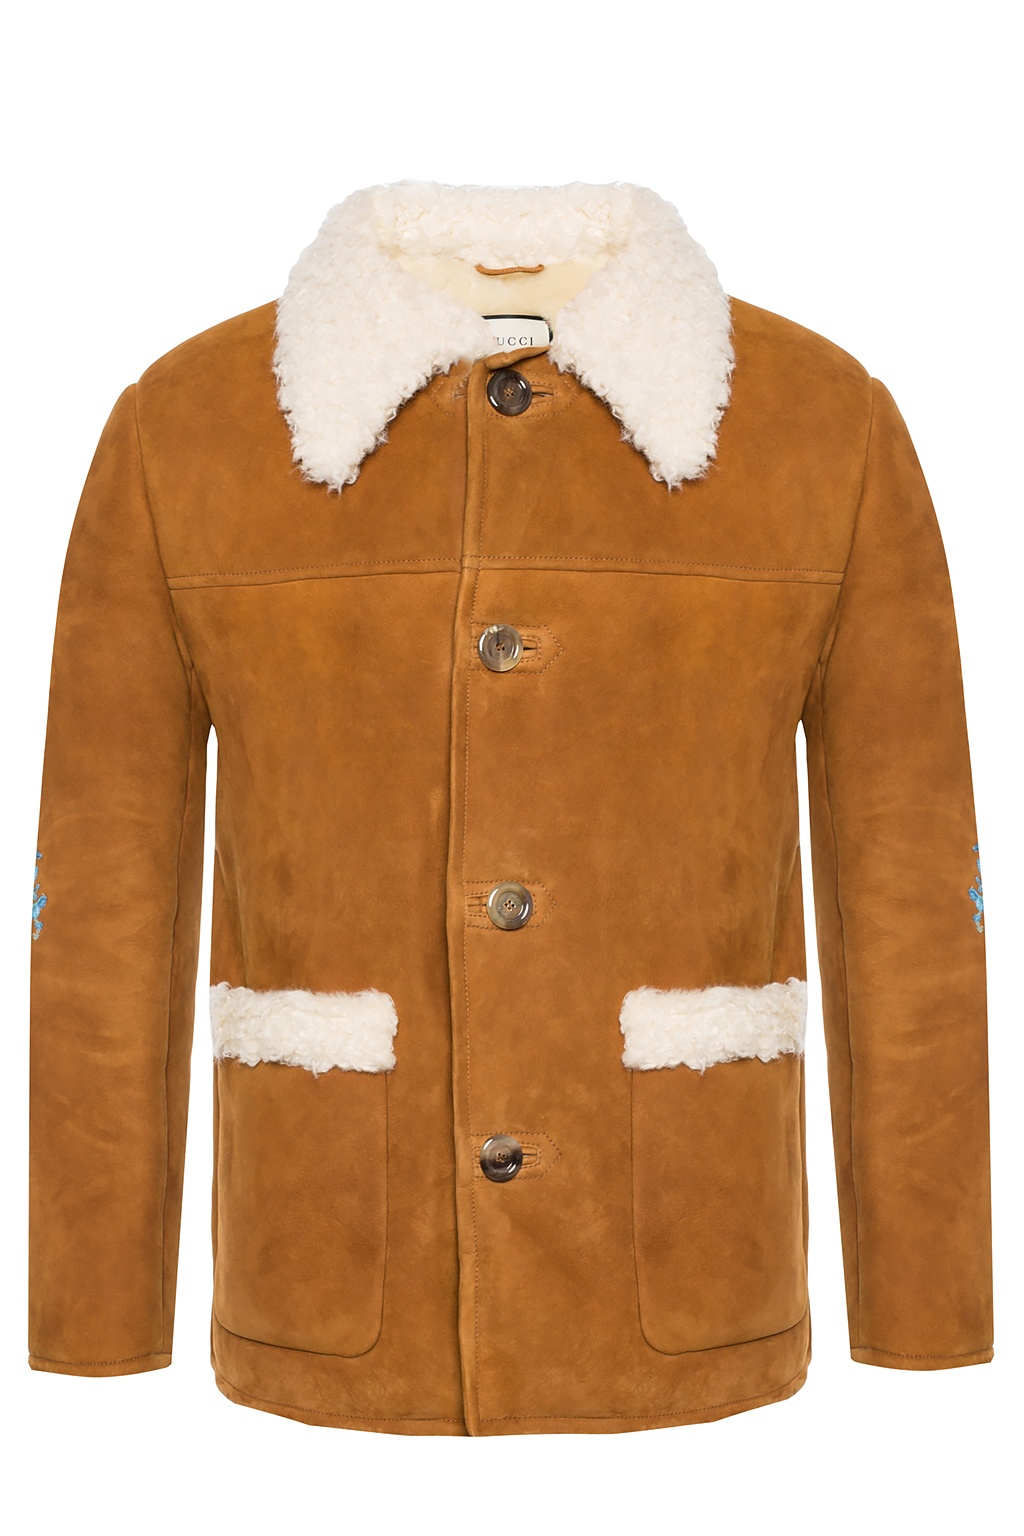 Gucci Shearling jacket with a sewn on application | Men's Clothing | Vitkac